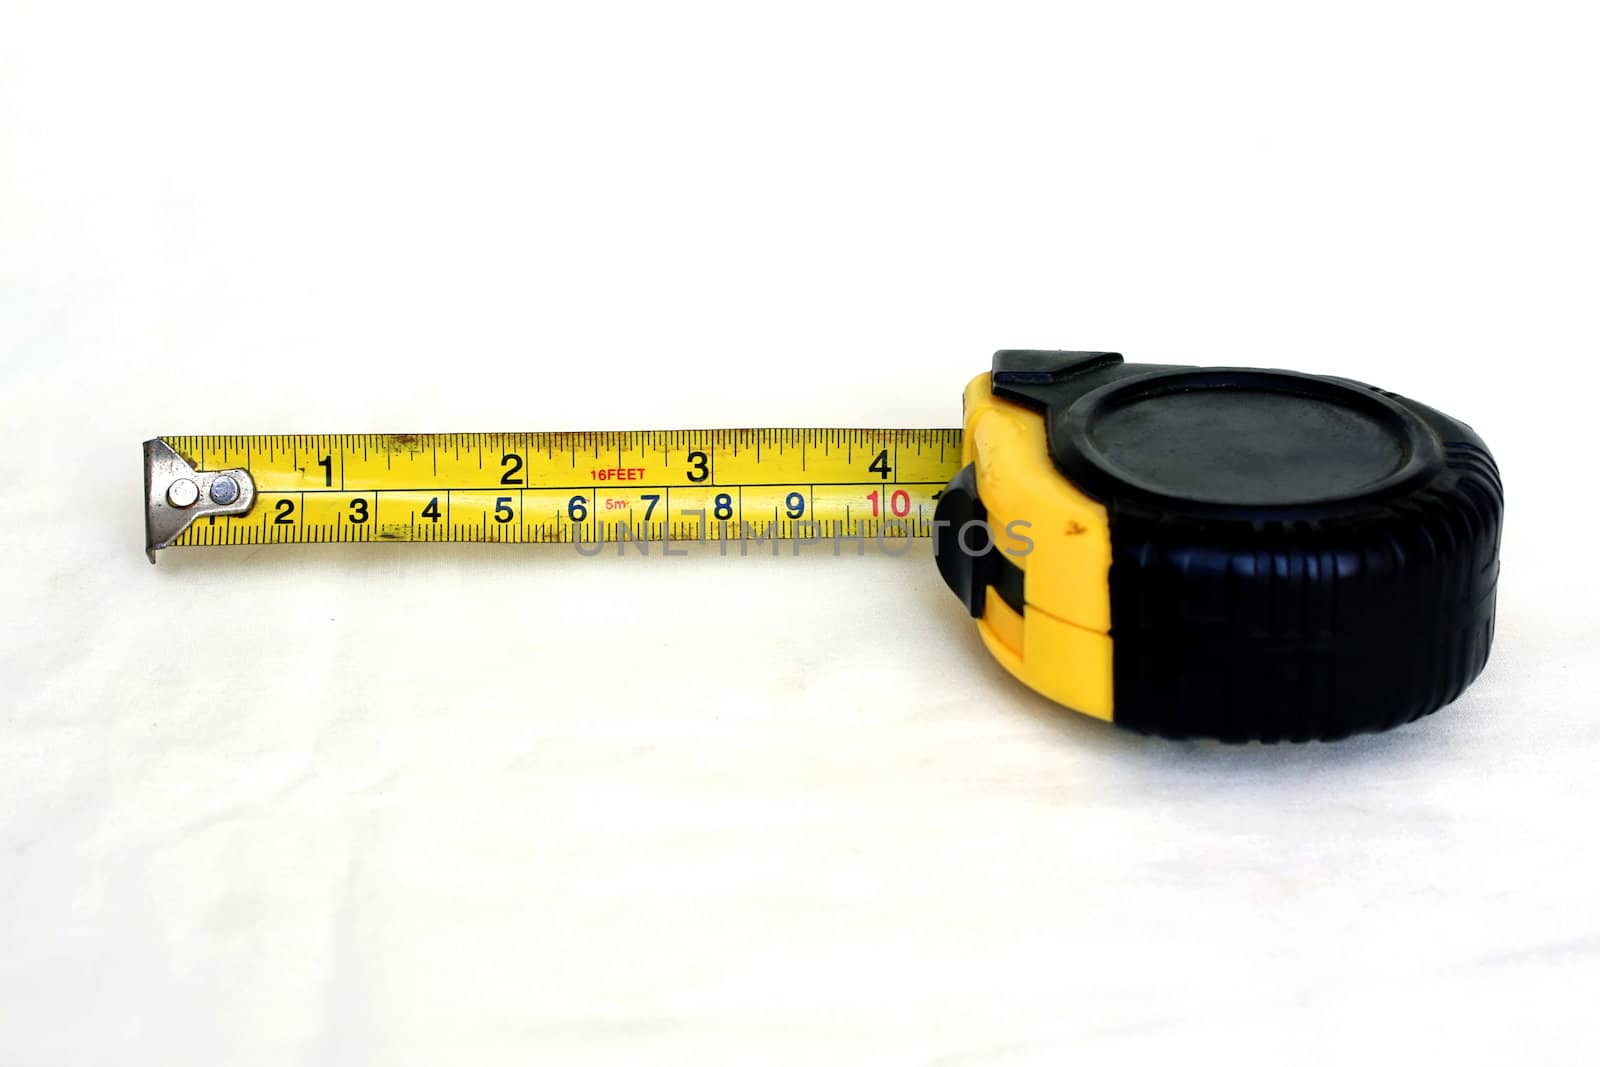 Measuring tape isolated on white